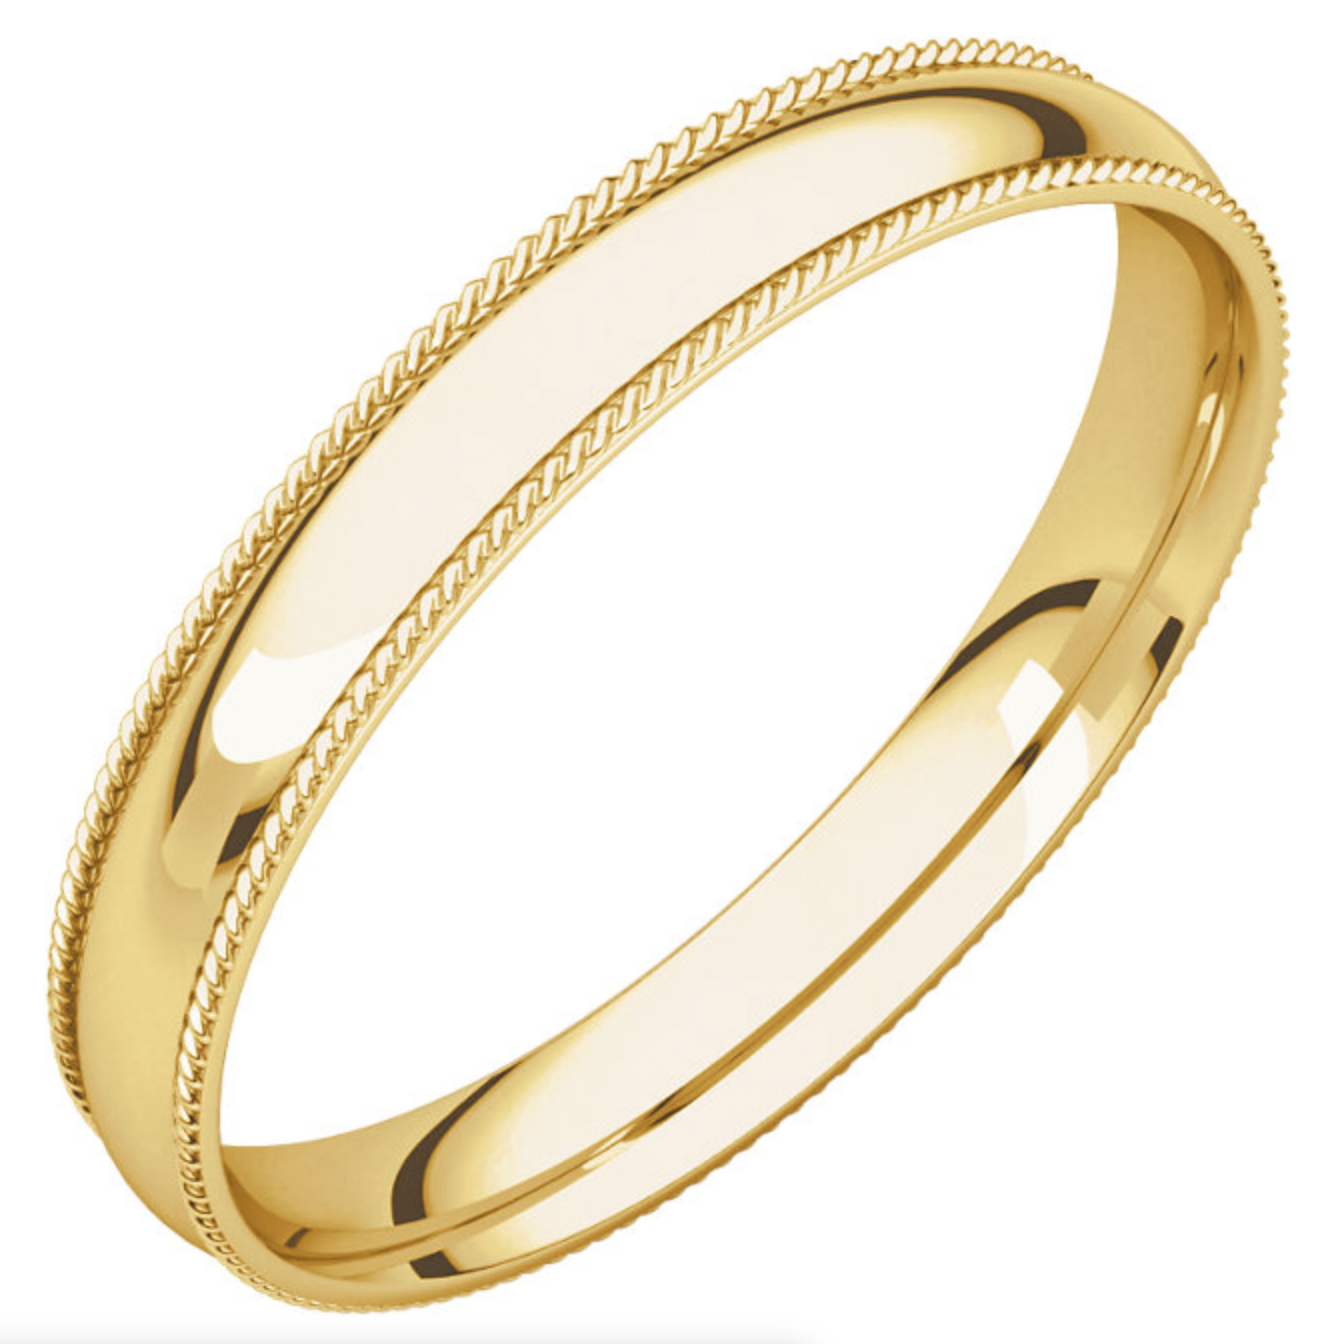 Classic Style Wedding Ring with Rope Edge Detail - Michael E. Minden Diamond Jewelers